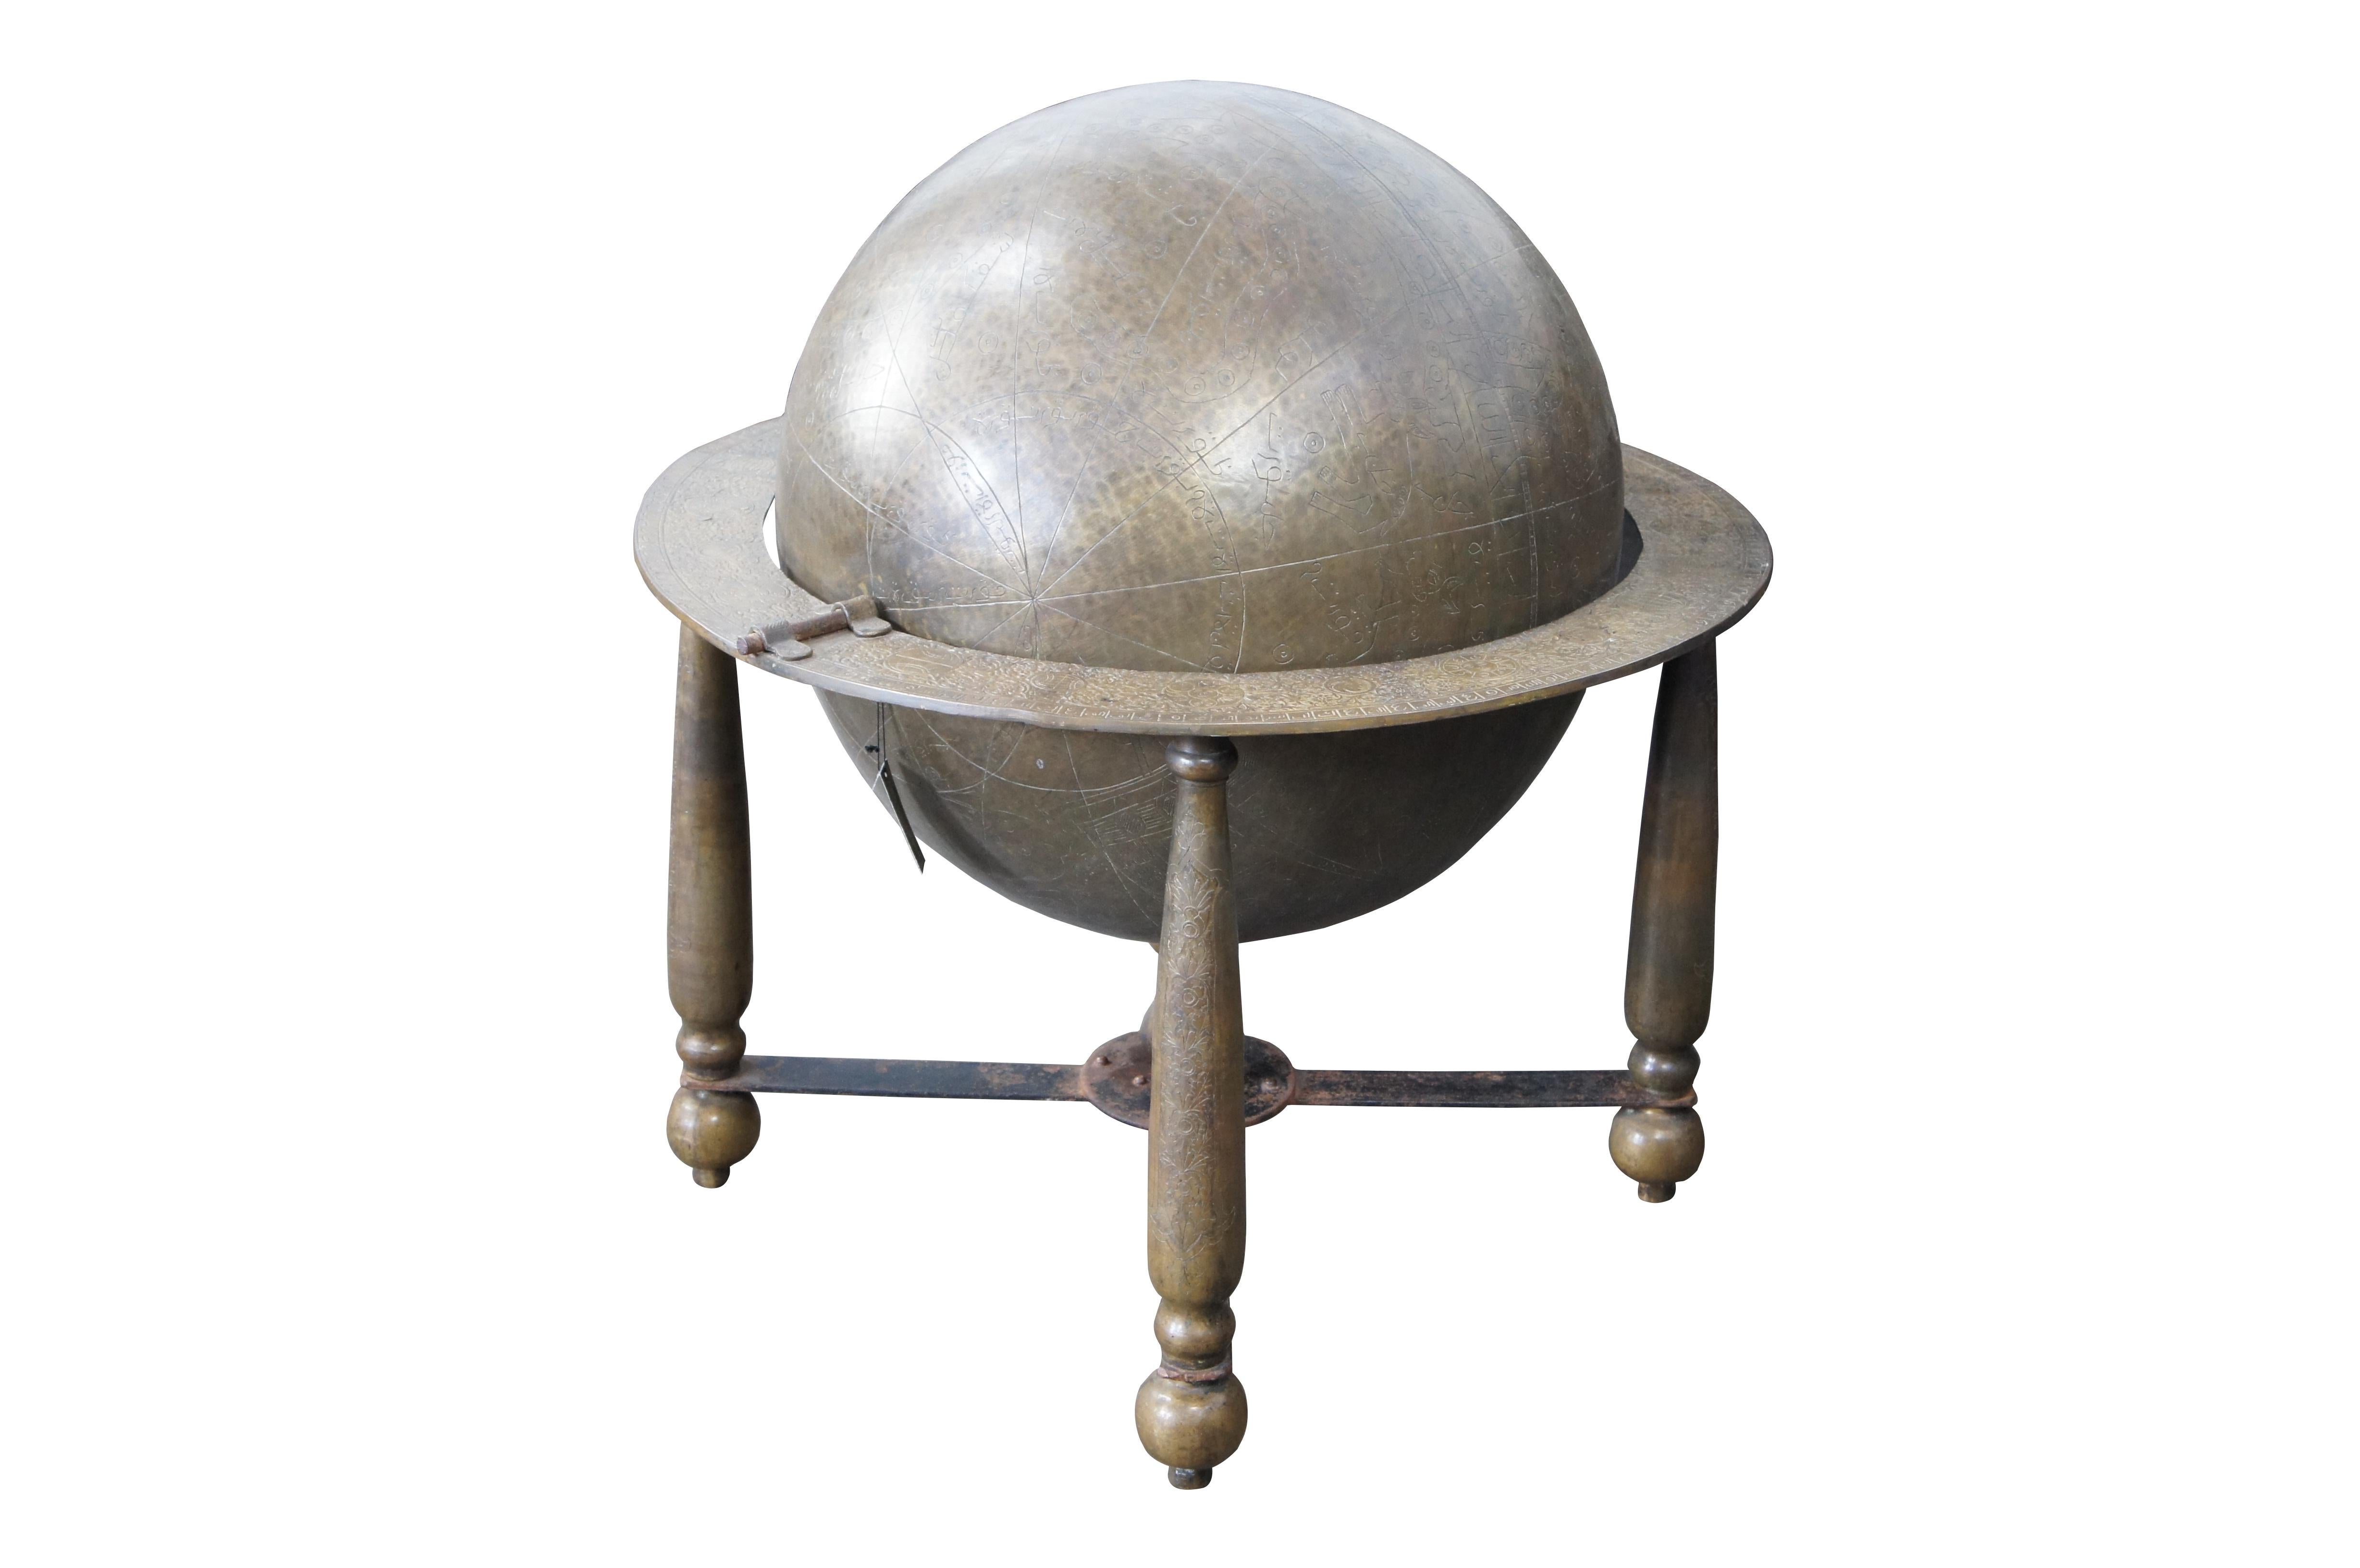 Islamic Celestial Globe by Arte International Furnishings. 

An exceptional large brass Islamic Celestial Globe. The hammered brass sphere constructed from two hemispheres with engraved scales and constellations, pivoted within horizontal ring